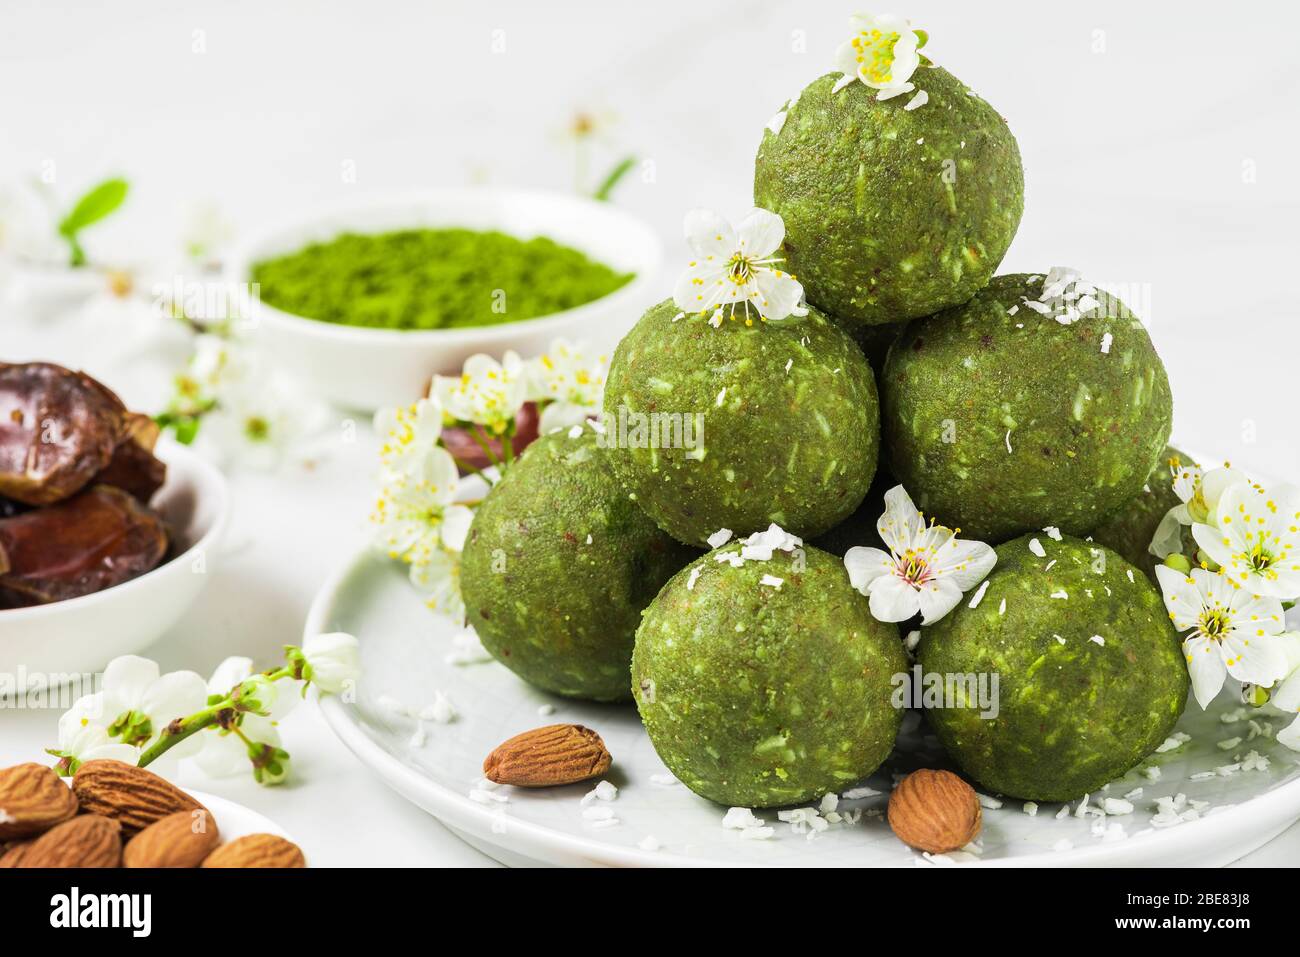 Homemade raw energy balls made of green matcha tea, dates and nuts with spring flowers. Healthy vegan dessert food on white background. Food styling. Stock Photo